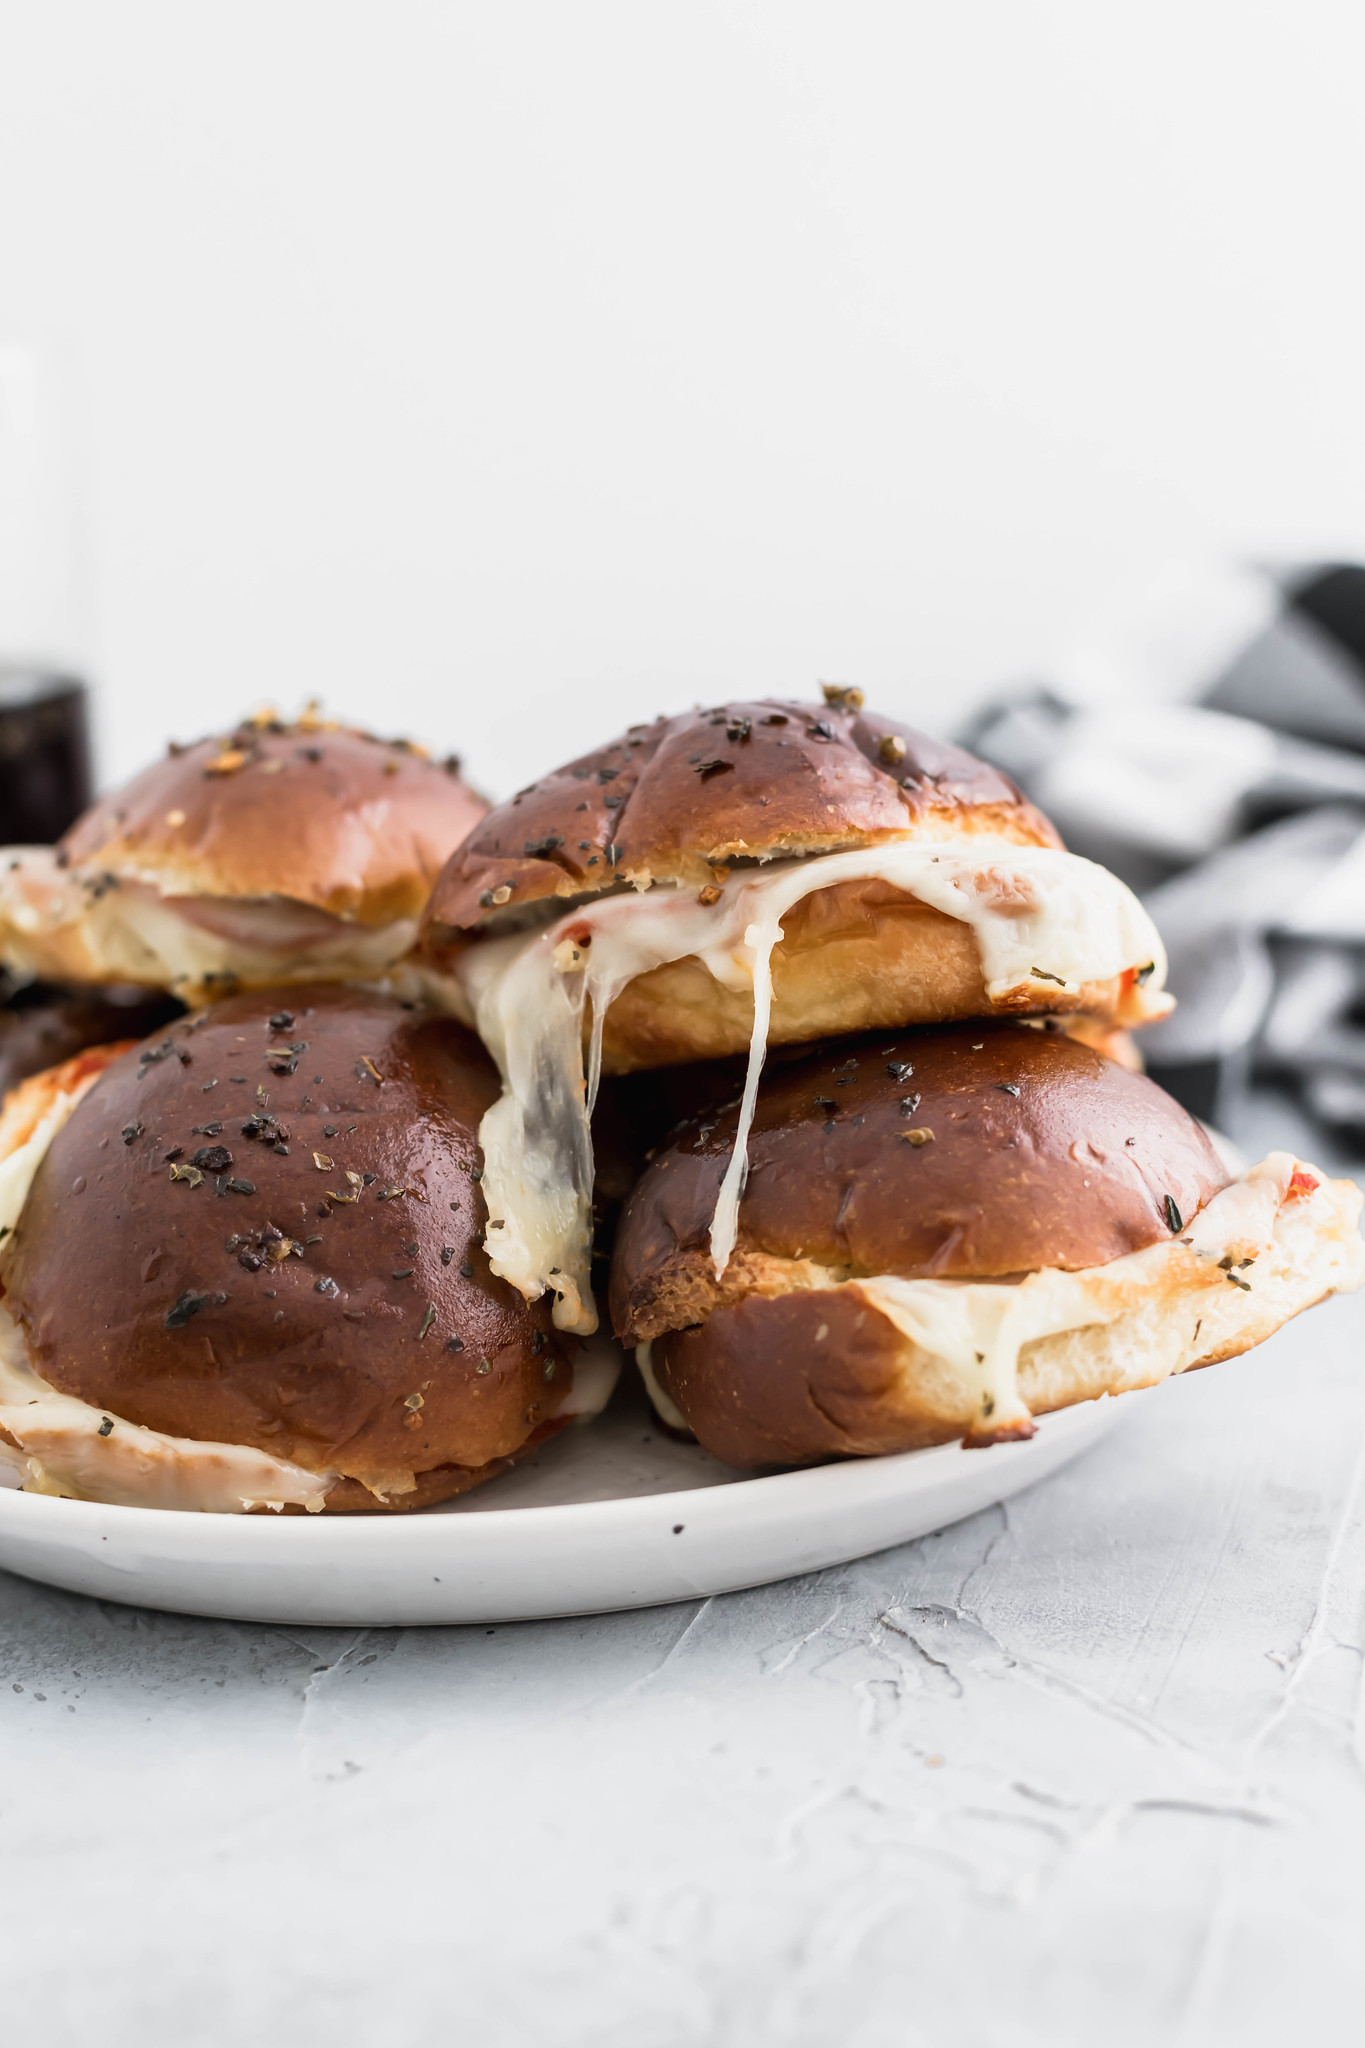 Need a simple dinner idea? These Easy Pepperoni Pizza Sliders are the perfect 30 minute meal or appetizer that the whole family will enjoy.